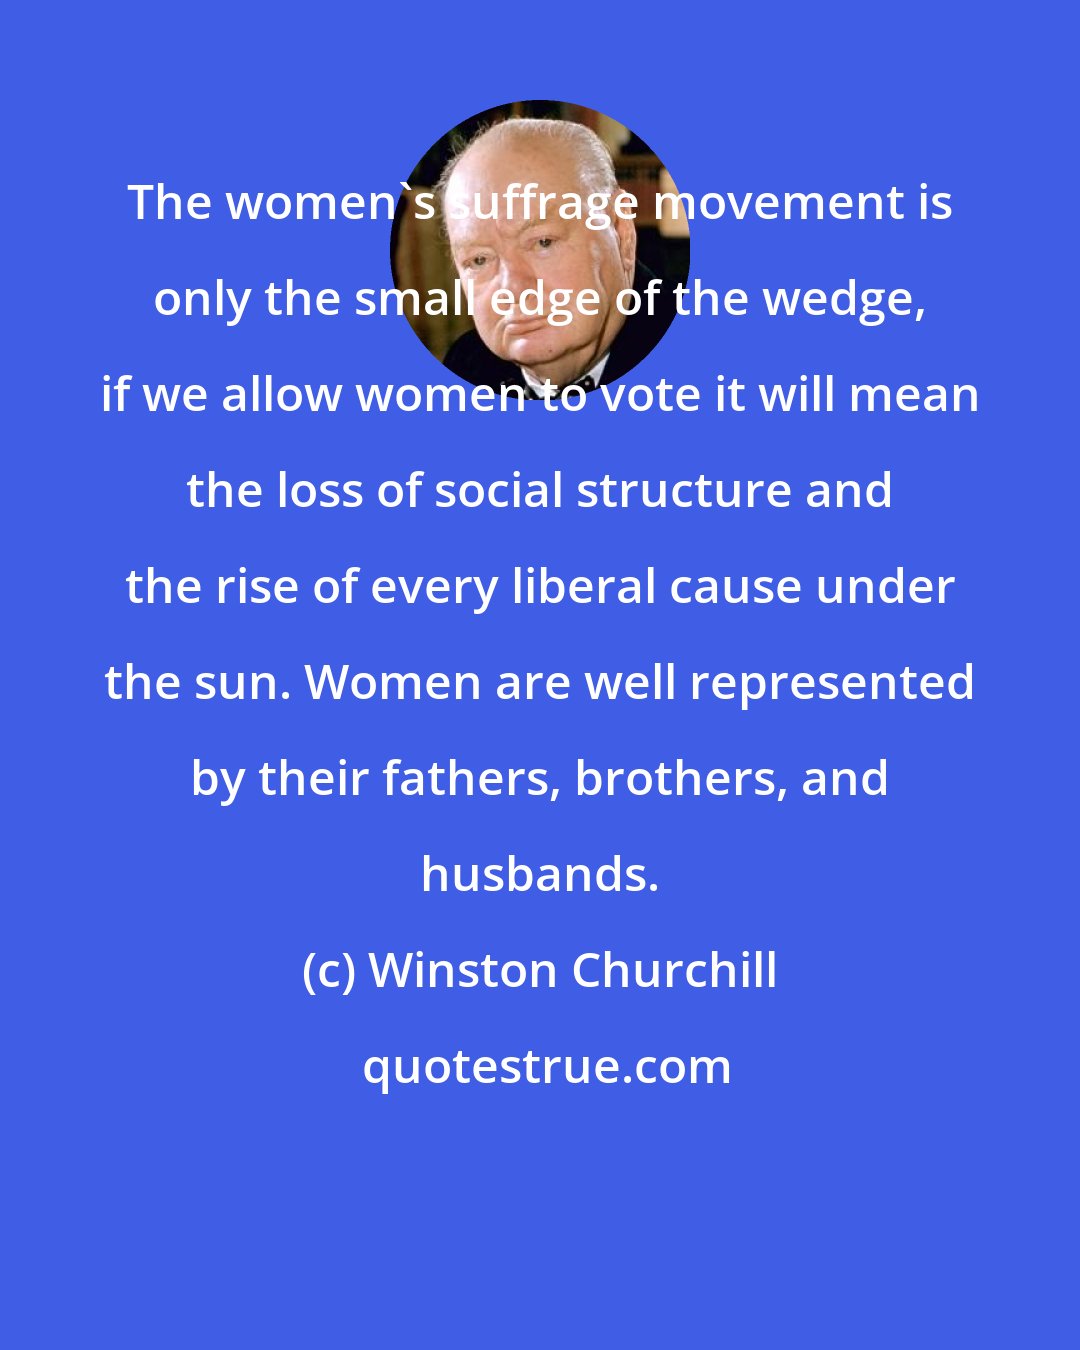 Winston Churchill: The women's suffrage movement is only the small edge of the wedge, if we allow women to vote it will mean the loss of social structure and the rise of every liberal cause under the sun. Women are well represented by their fathers, brothers, and husbands.